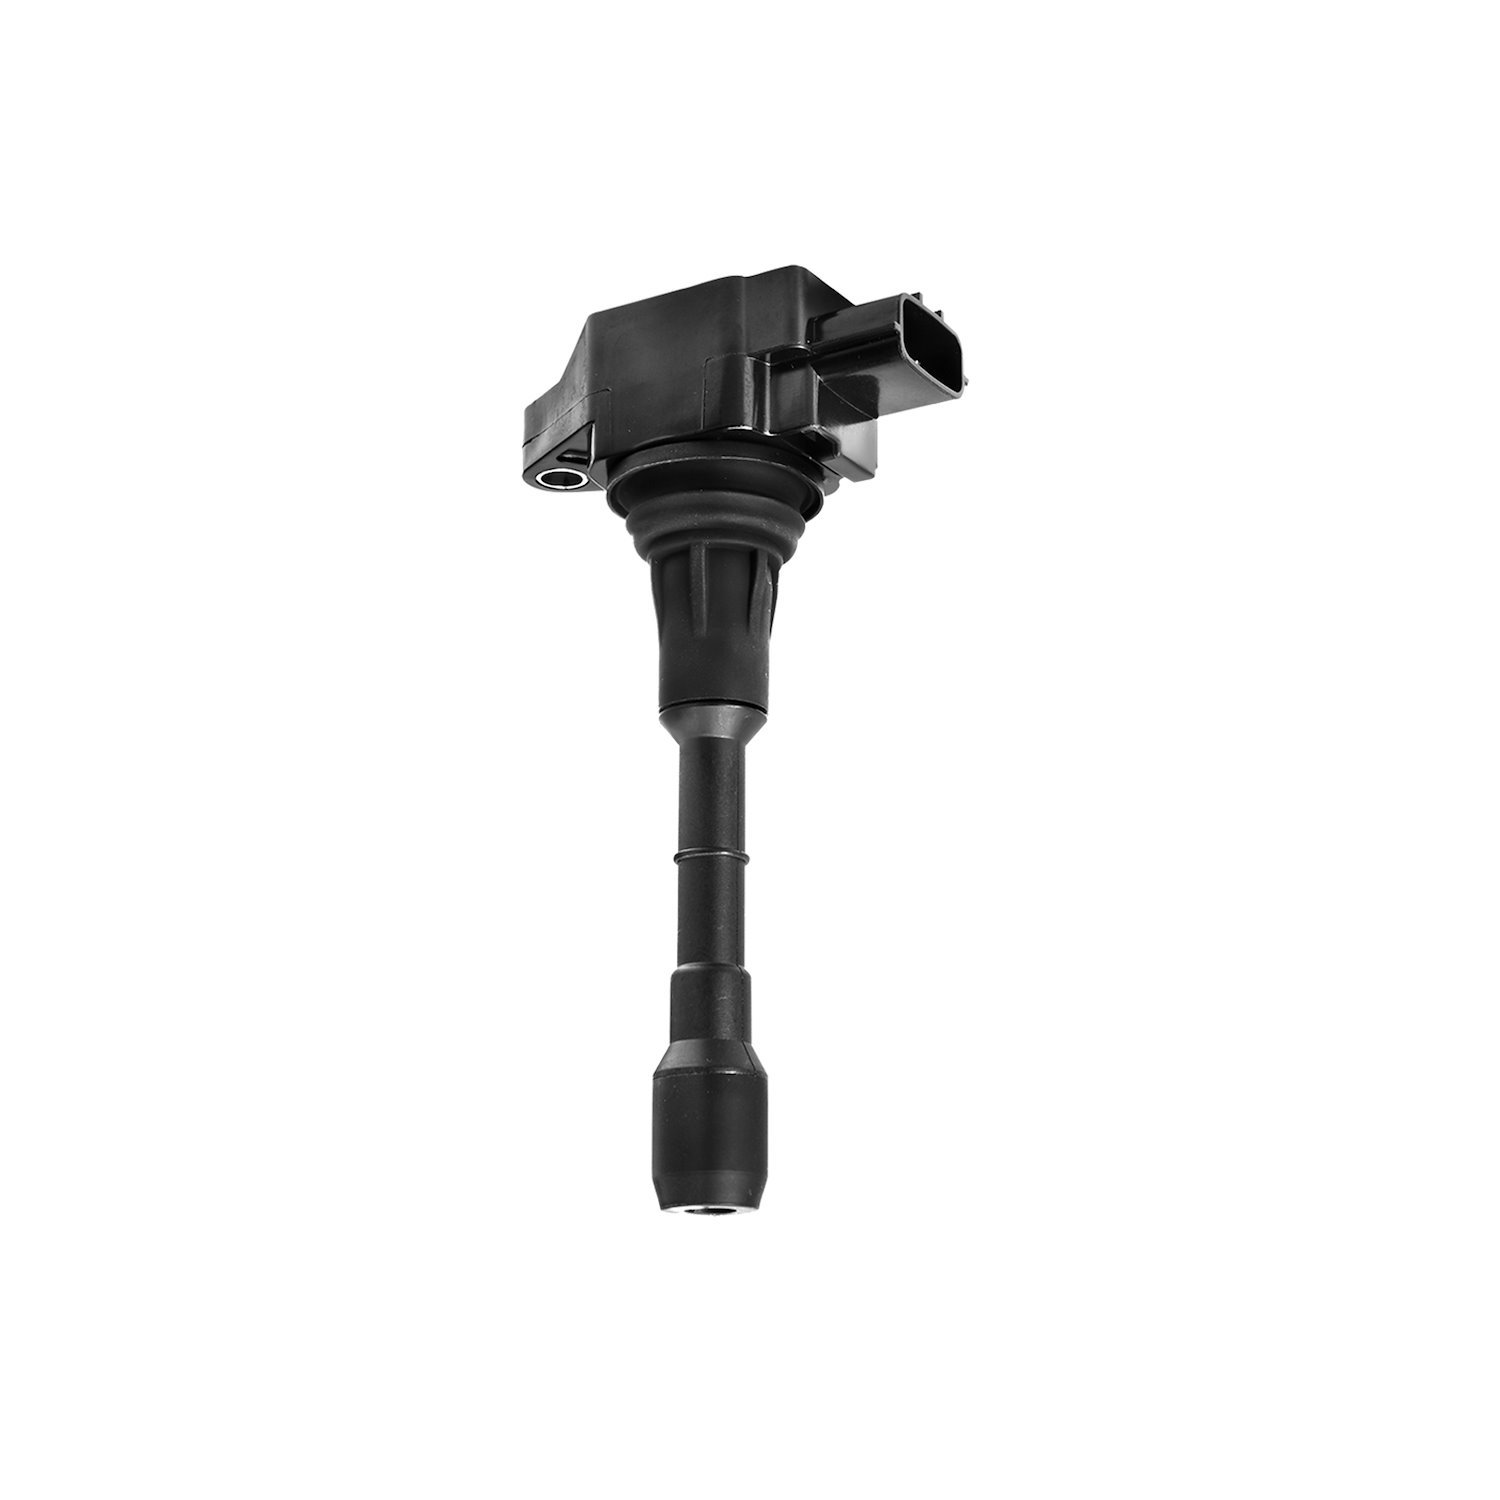 OE Replacement Ignition Coil for Infiniti G25 Nissan